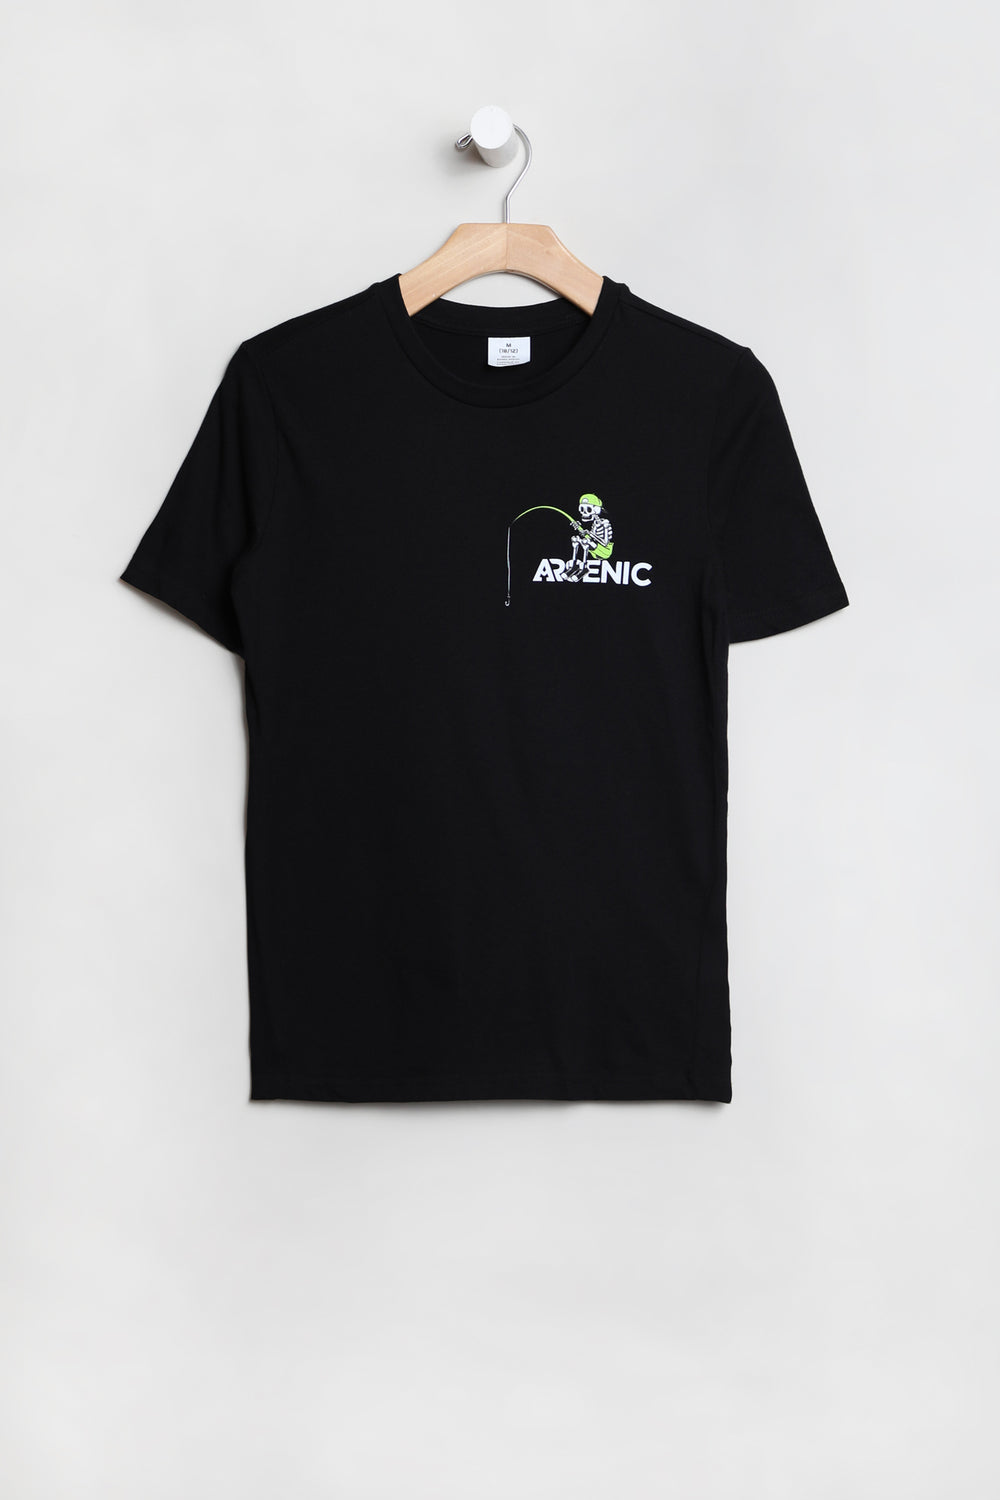 Arsenic Youth Get Lost T-Shirt Arsenic Youth Get Lost T-Shirt